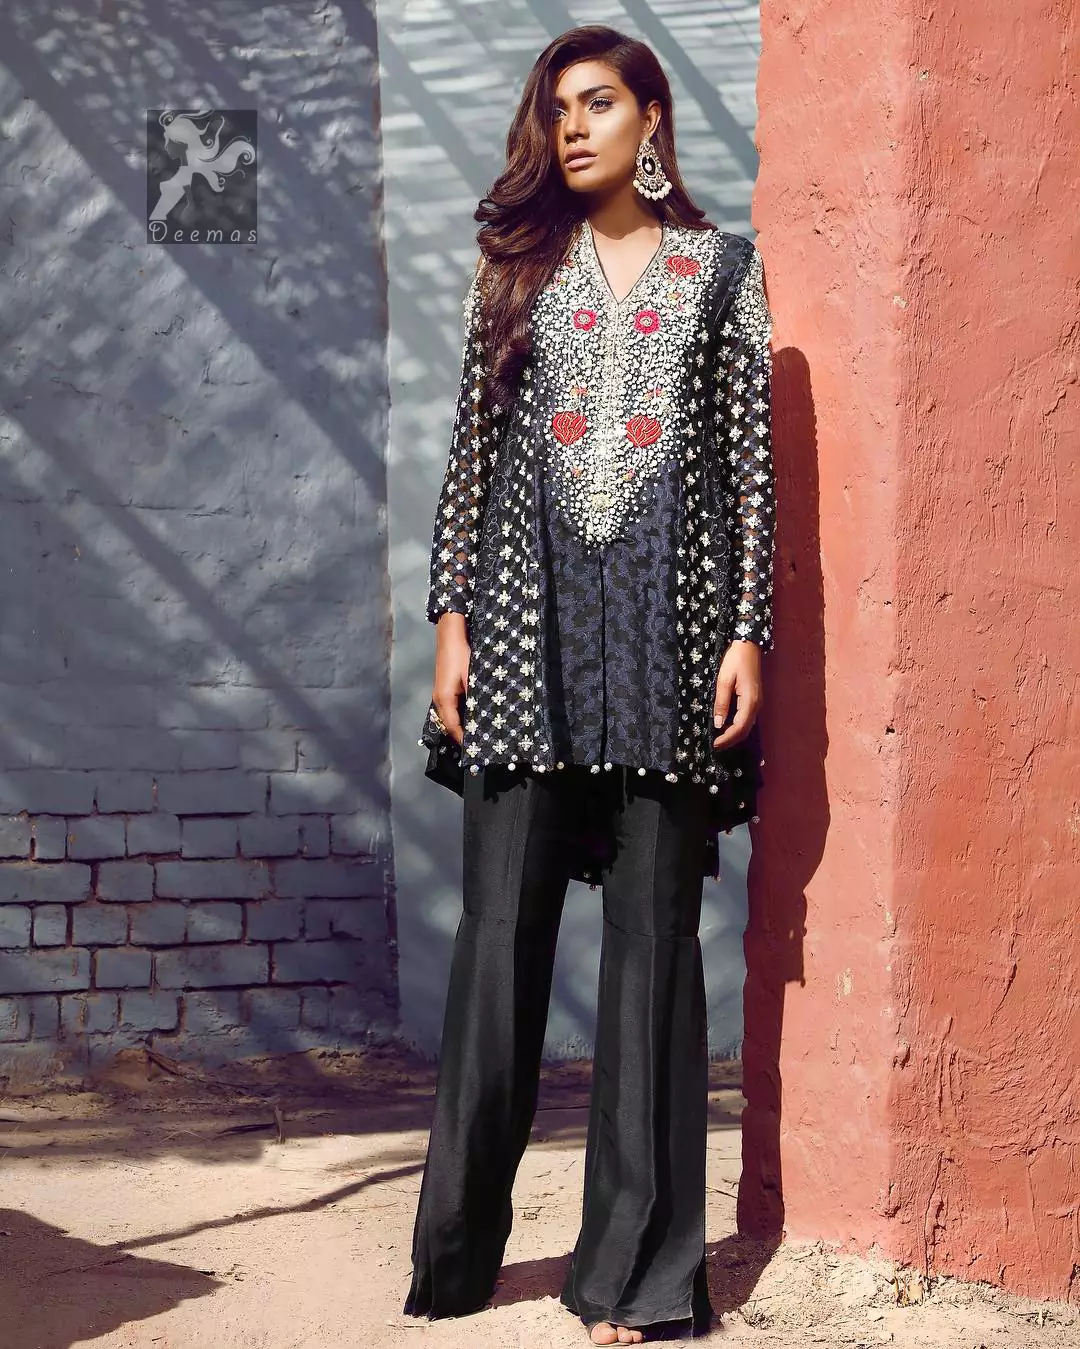 Black peplum made with pure banarsi jamawar chiffon. Peplum has multiple panels of different banarsi patterns. The white and silver embellishment on the neckline, side panels, and sleeves. Pure raw silk sharara pants.